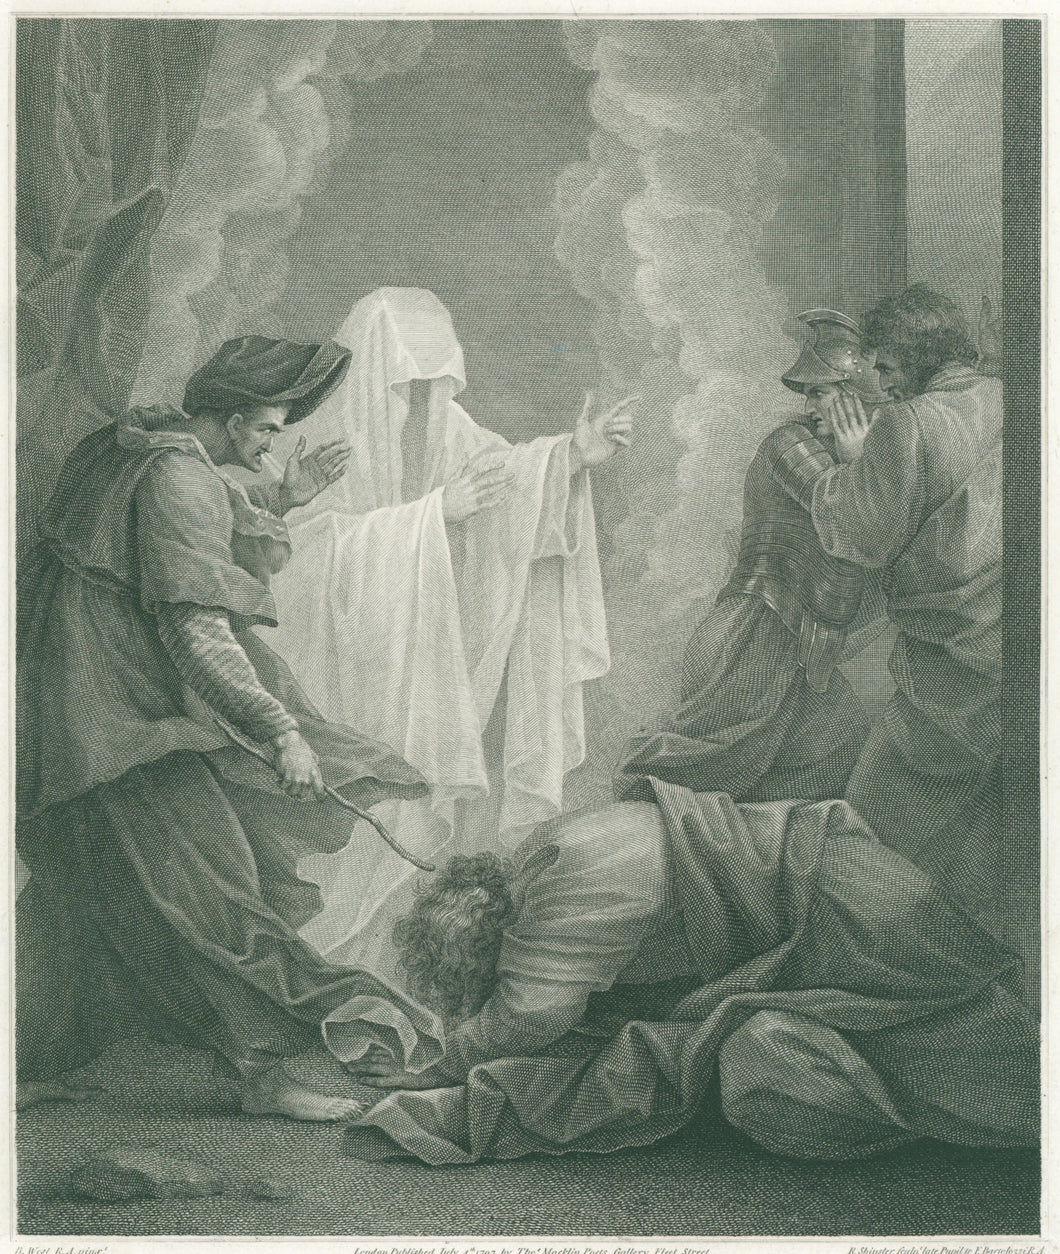 Benjamin West “The Witch of Endor.” From Thomas Macklin’s 